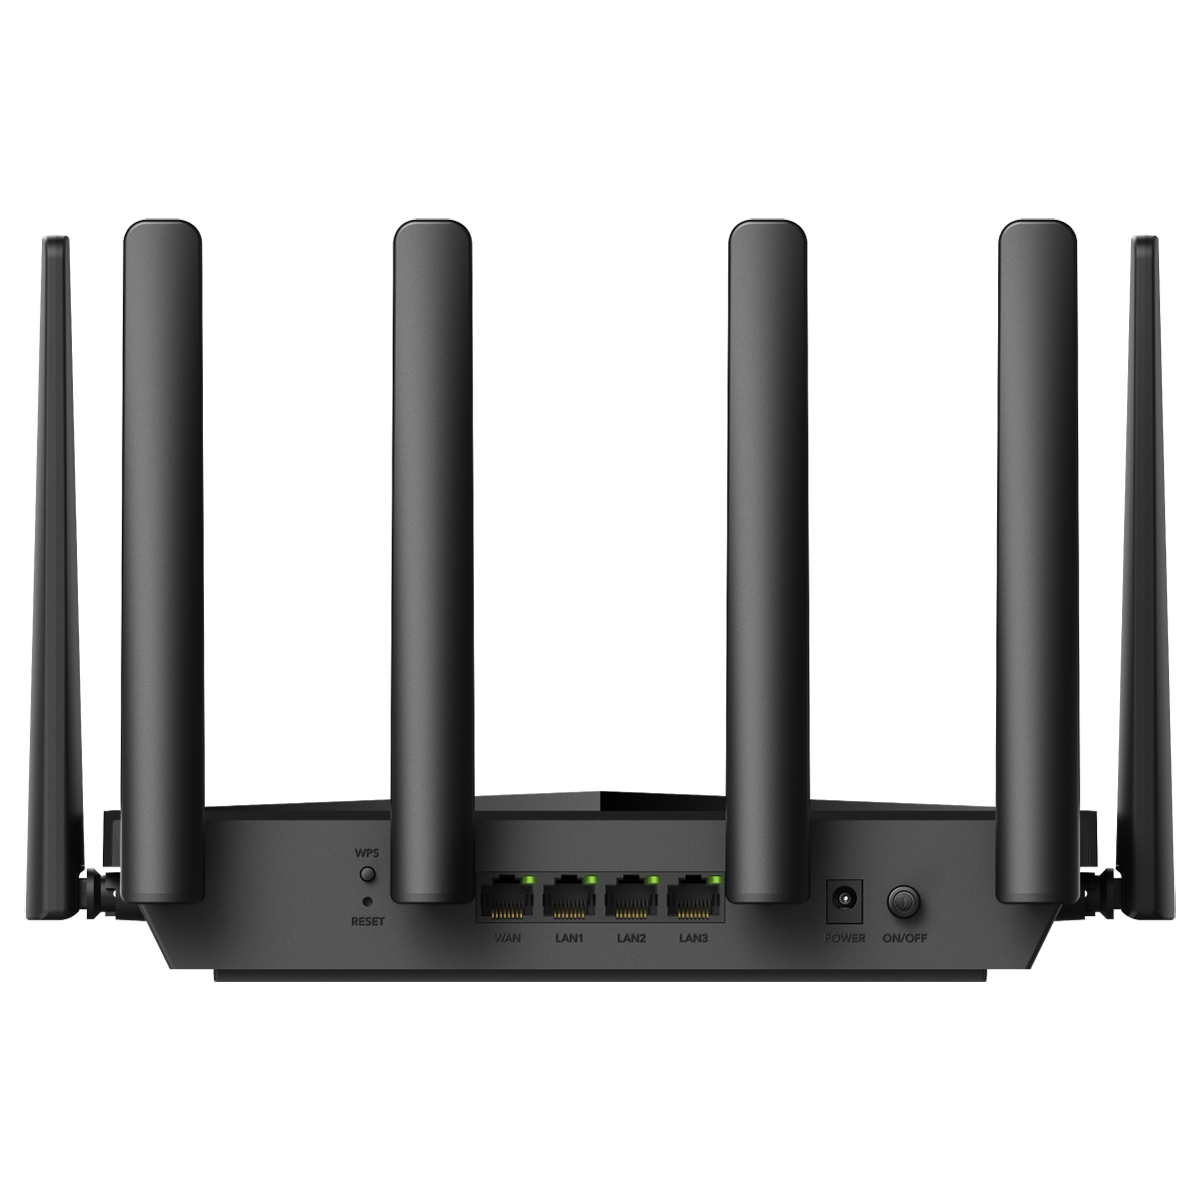 BE6500 2.5G Mesh Wi-Fi 7 Router, WR6500 1.0